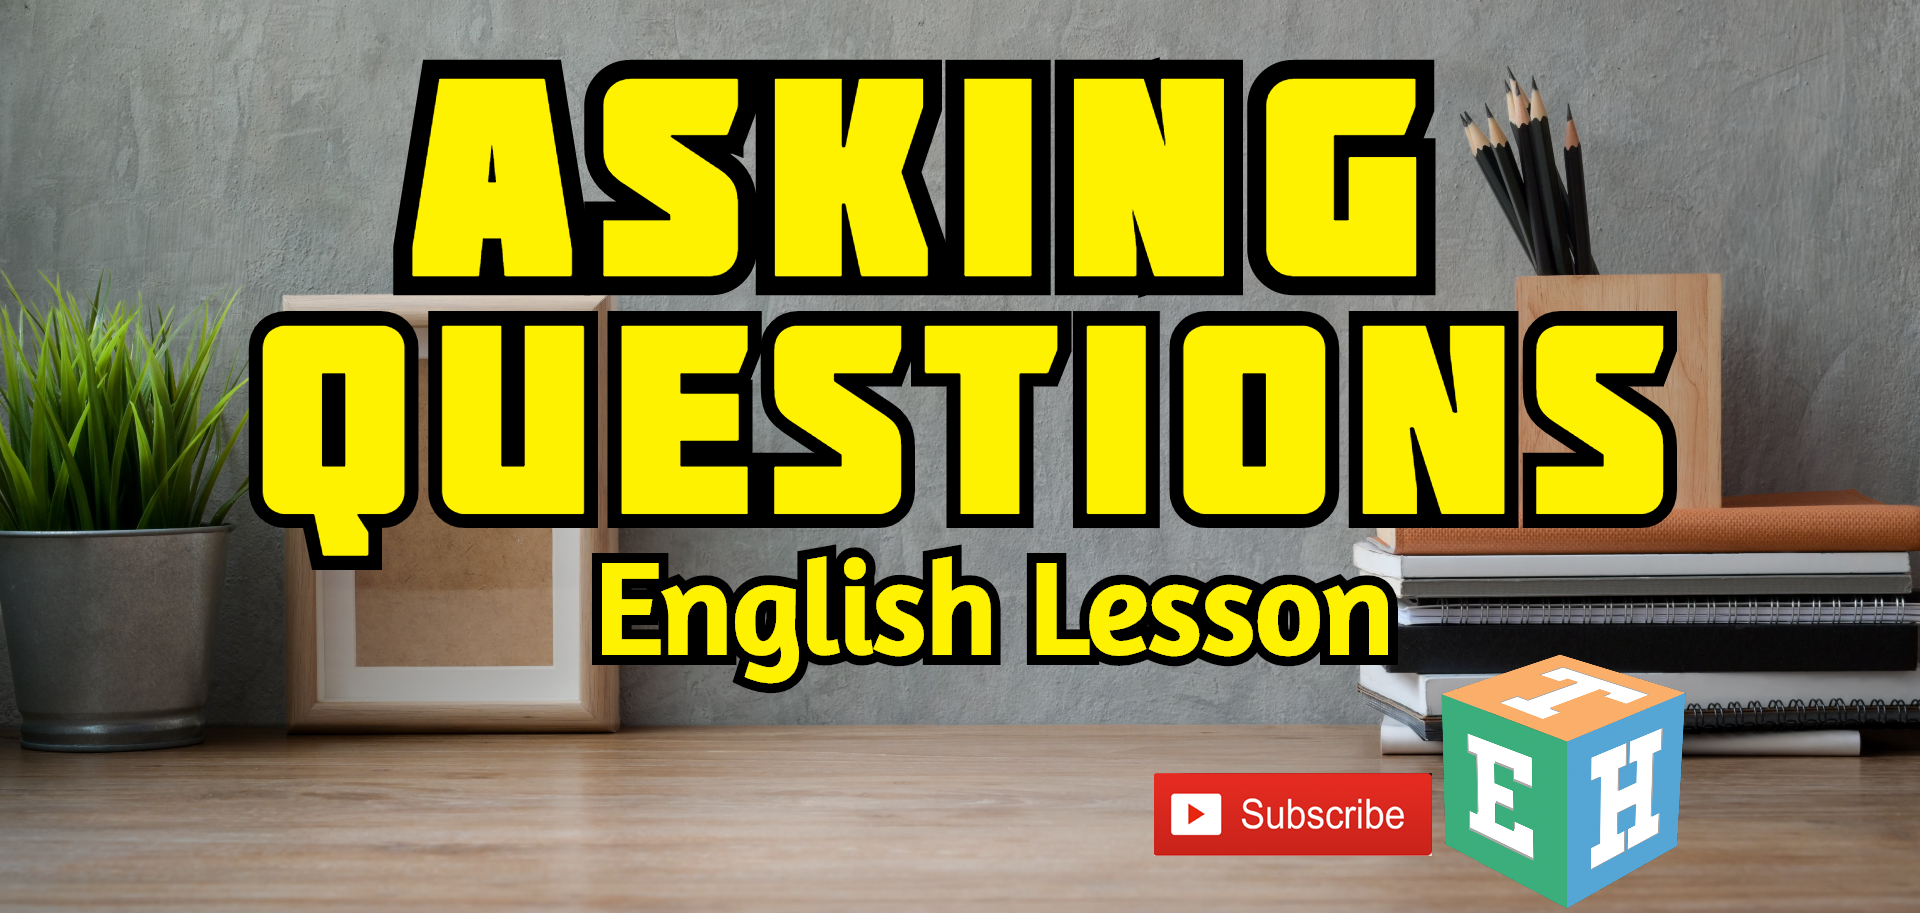 Asking Questions in English Lesson